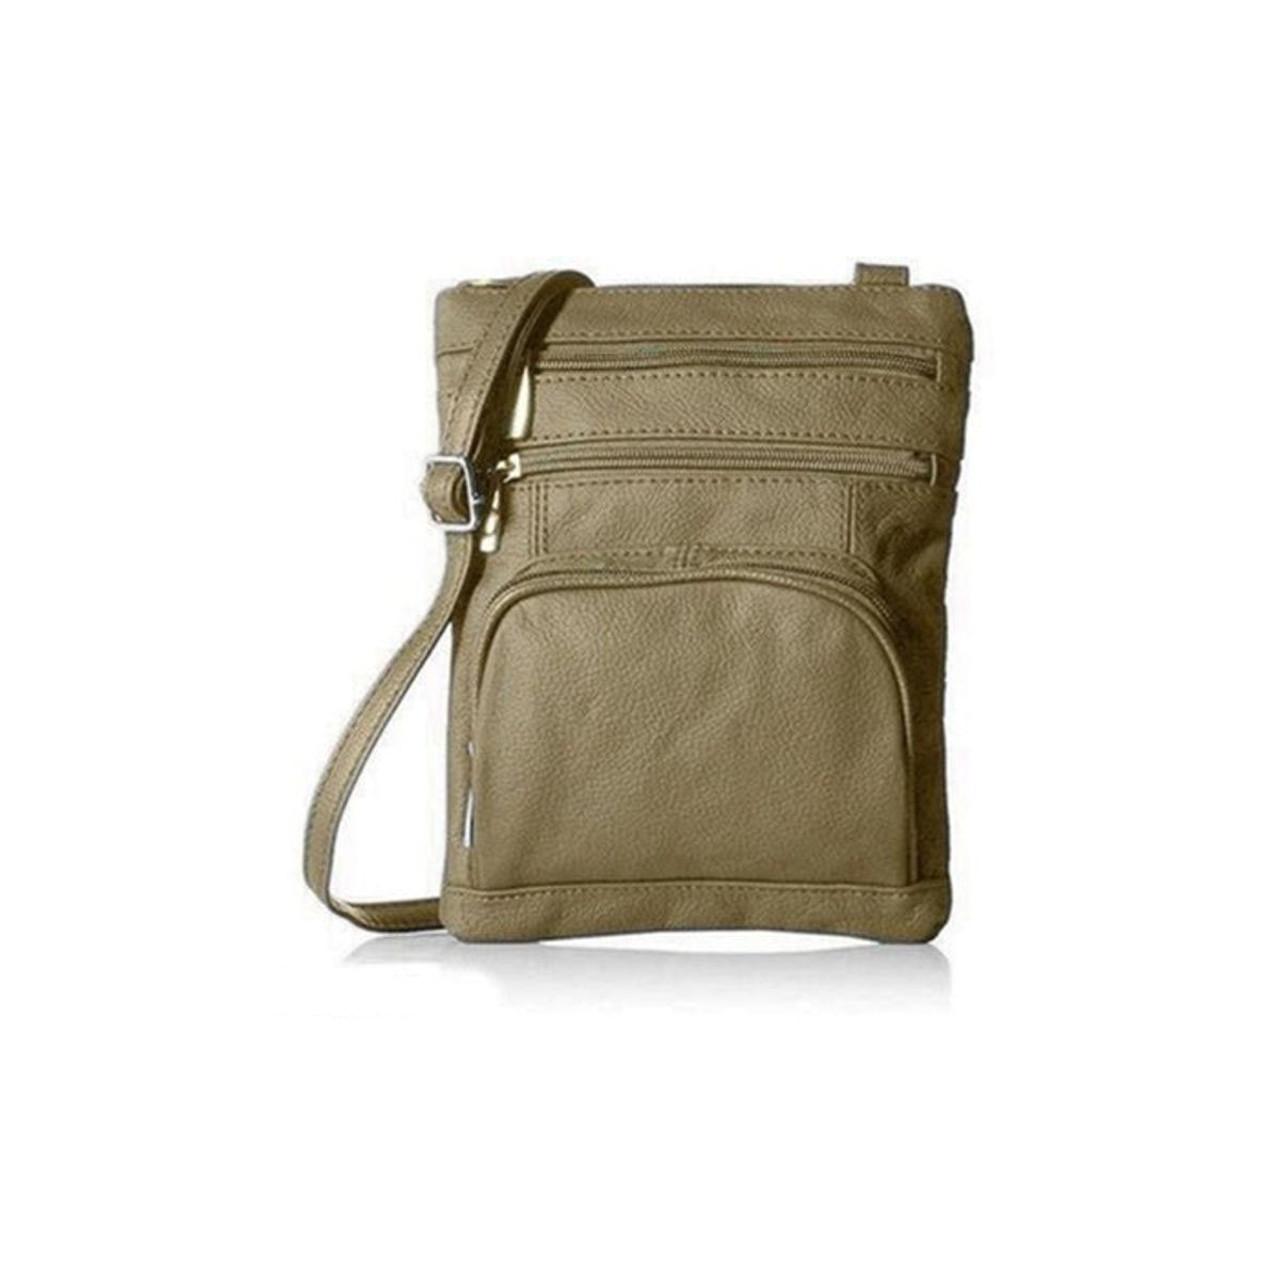 Super Soft Leather Crossbody Bag with Strap (3 Sizes) product image